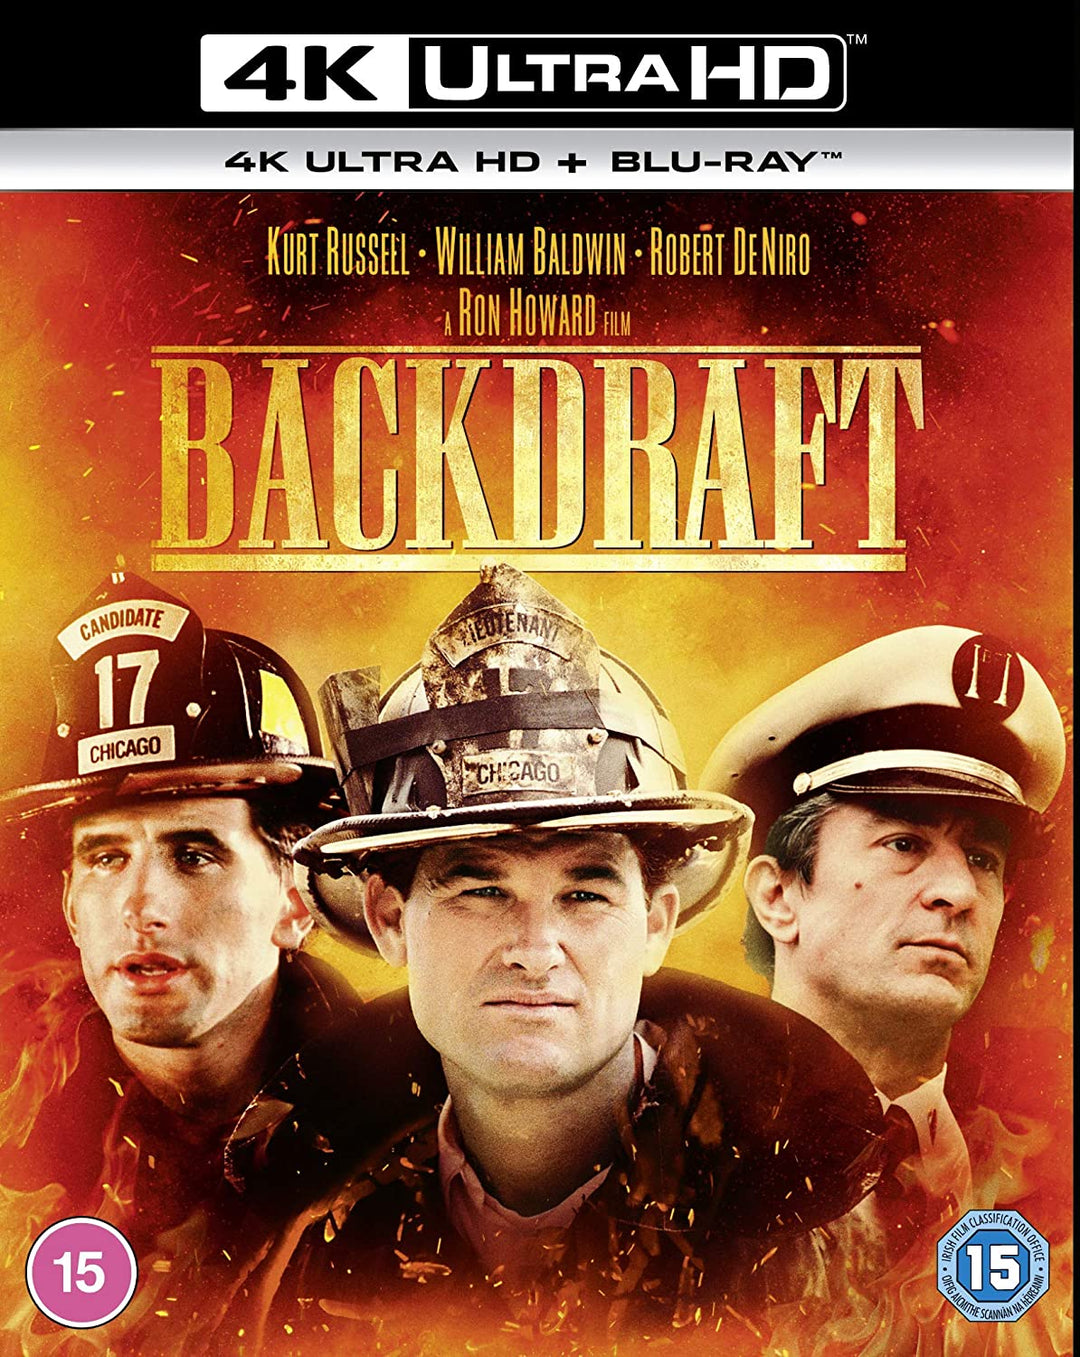 Backdraft (Includes [4K Ultra HD] [1991] [Region Free] - Thriller/Action [Blu-ray]